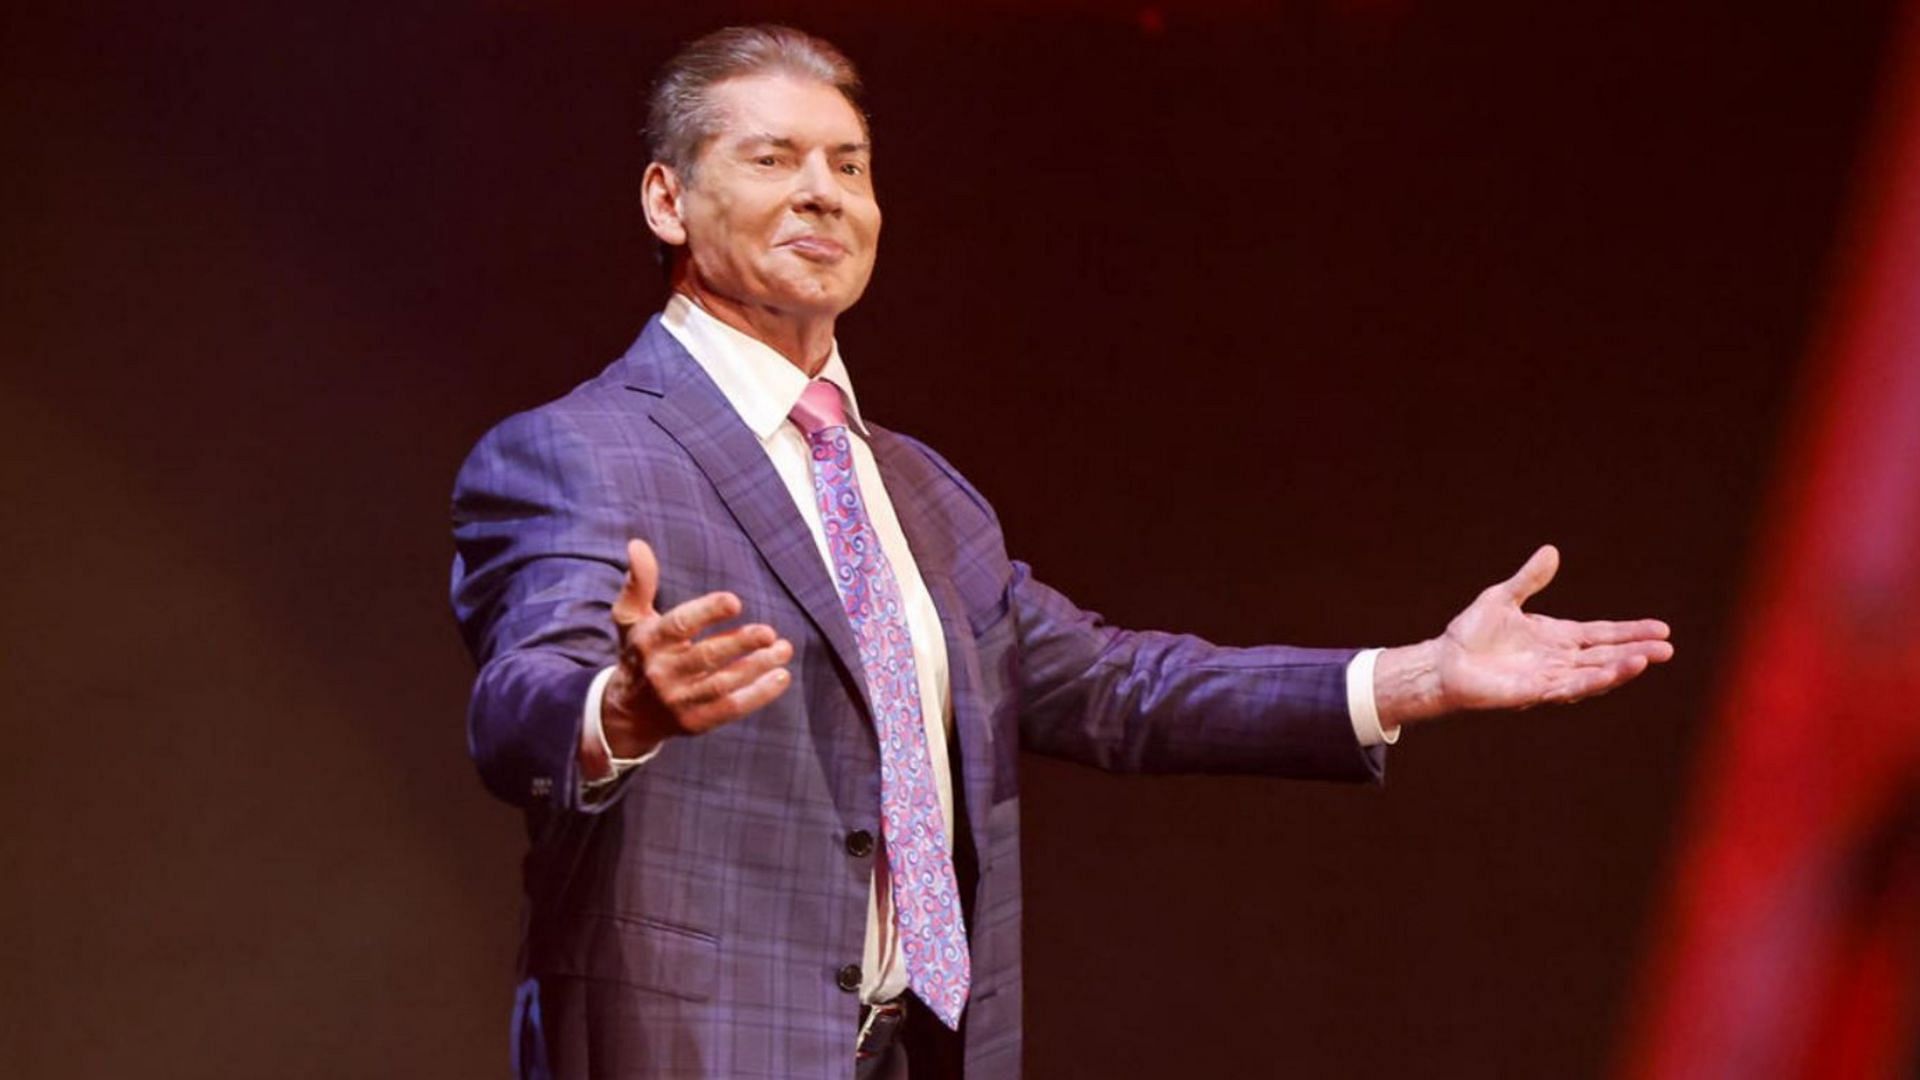 Vince McMahon recently returned to WWE as Executive Chairman